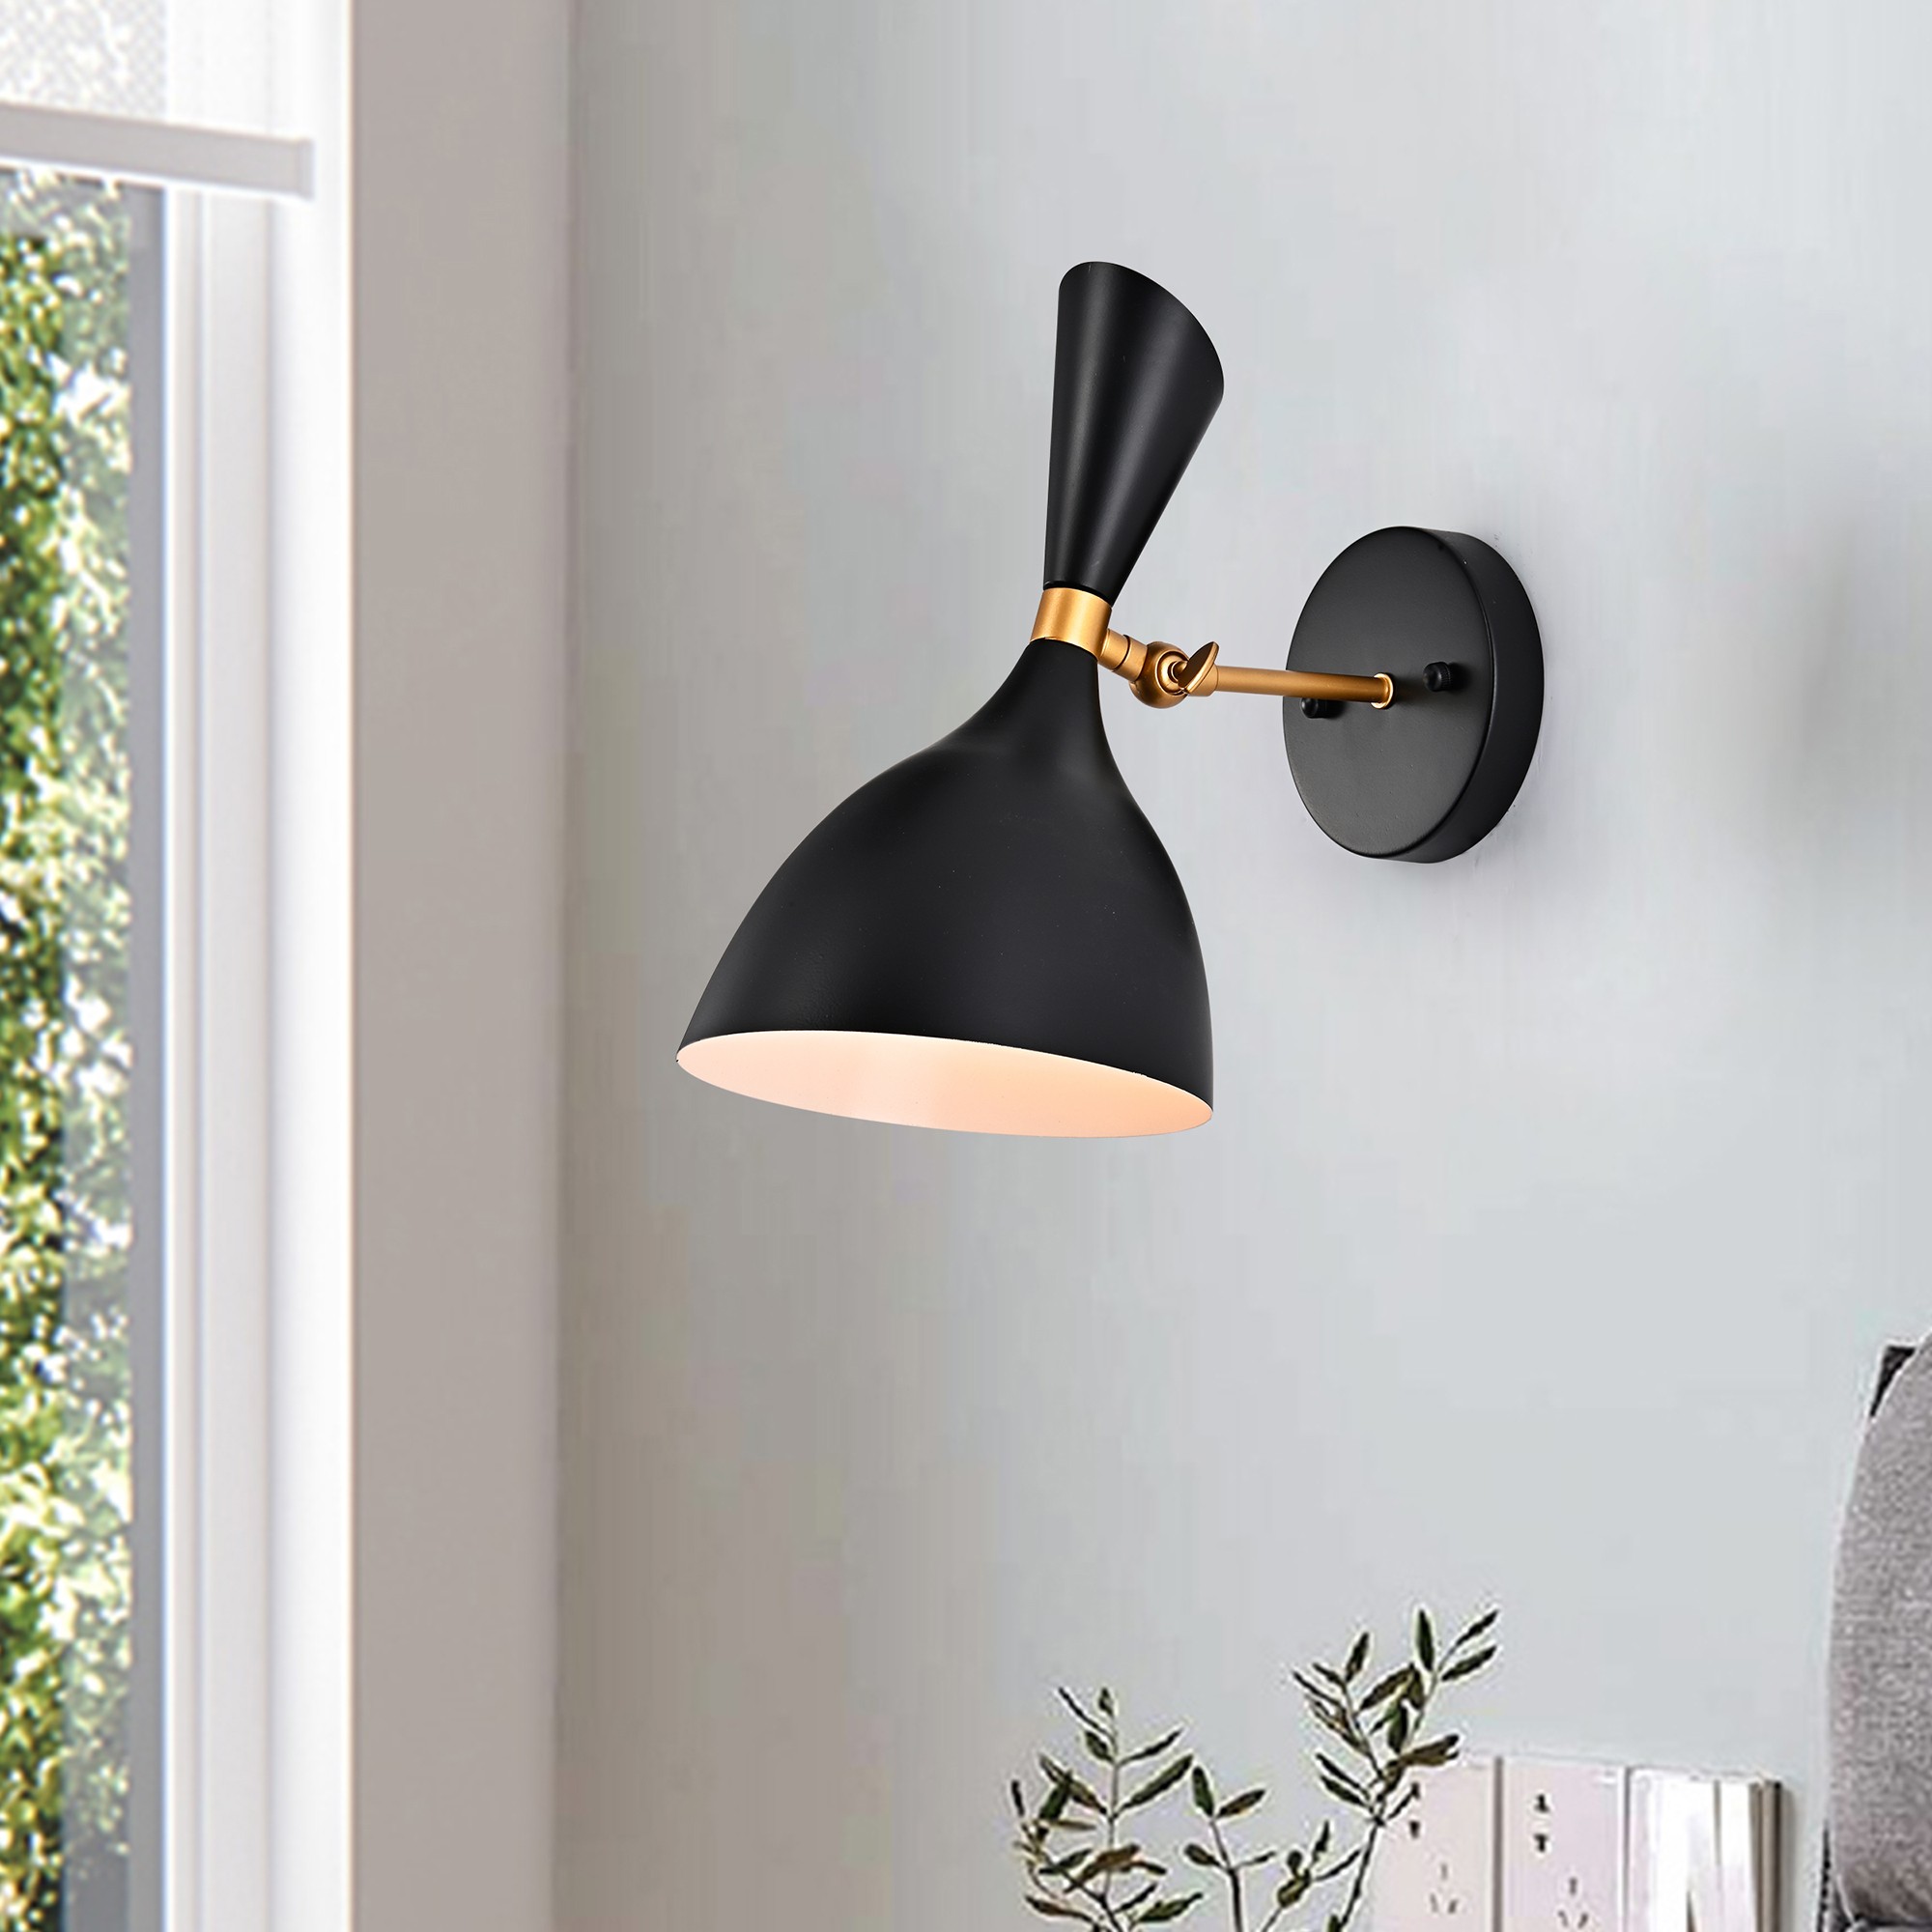 Peri 7.3 in. 1-Light Indoor Matte Black and Gold Finish Wall Sconce with Light Kit